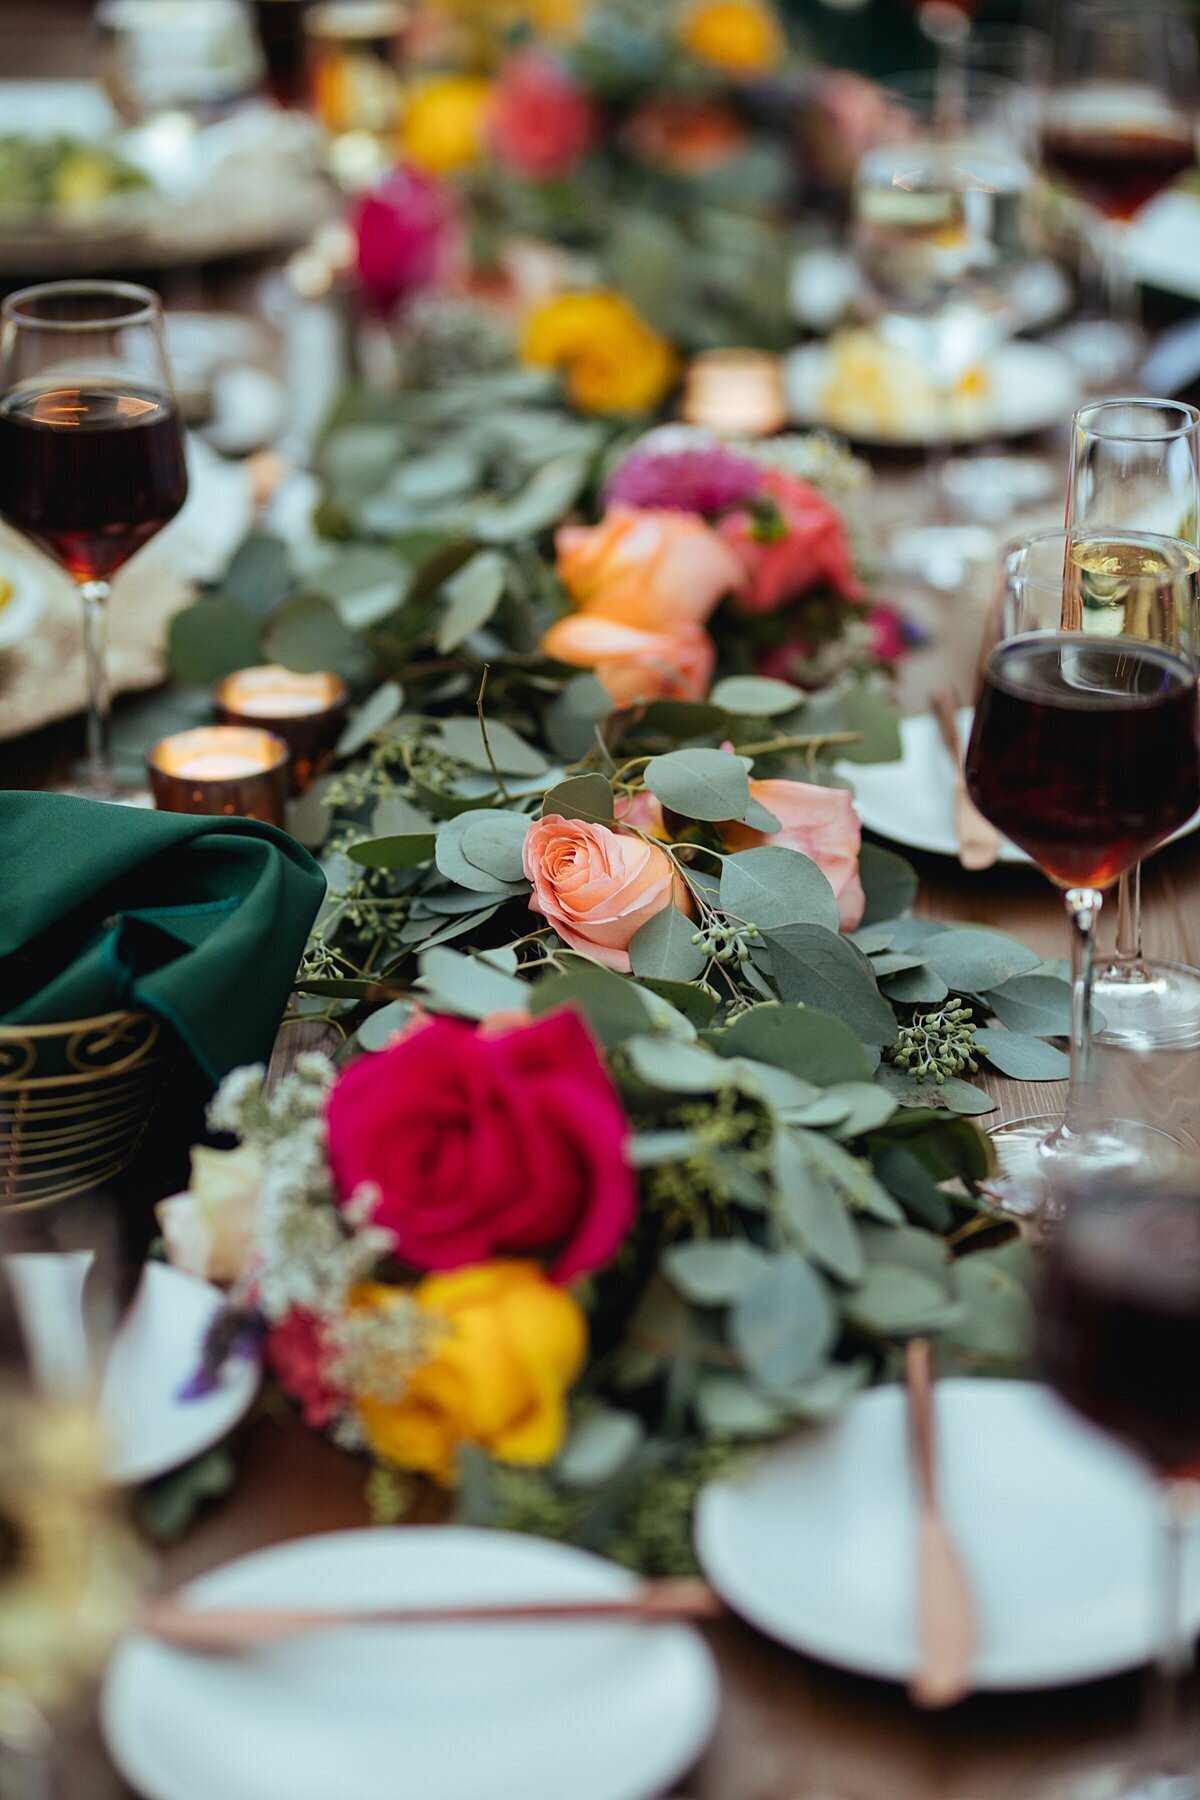 long farm table set with bread and butter plates with small gold butter knives and a long garland of greenery accented by hot pink, yellow, orange and peach roses, low candles in gold votive holders and stemmed wine glasses with red wine